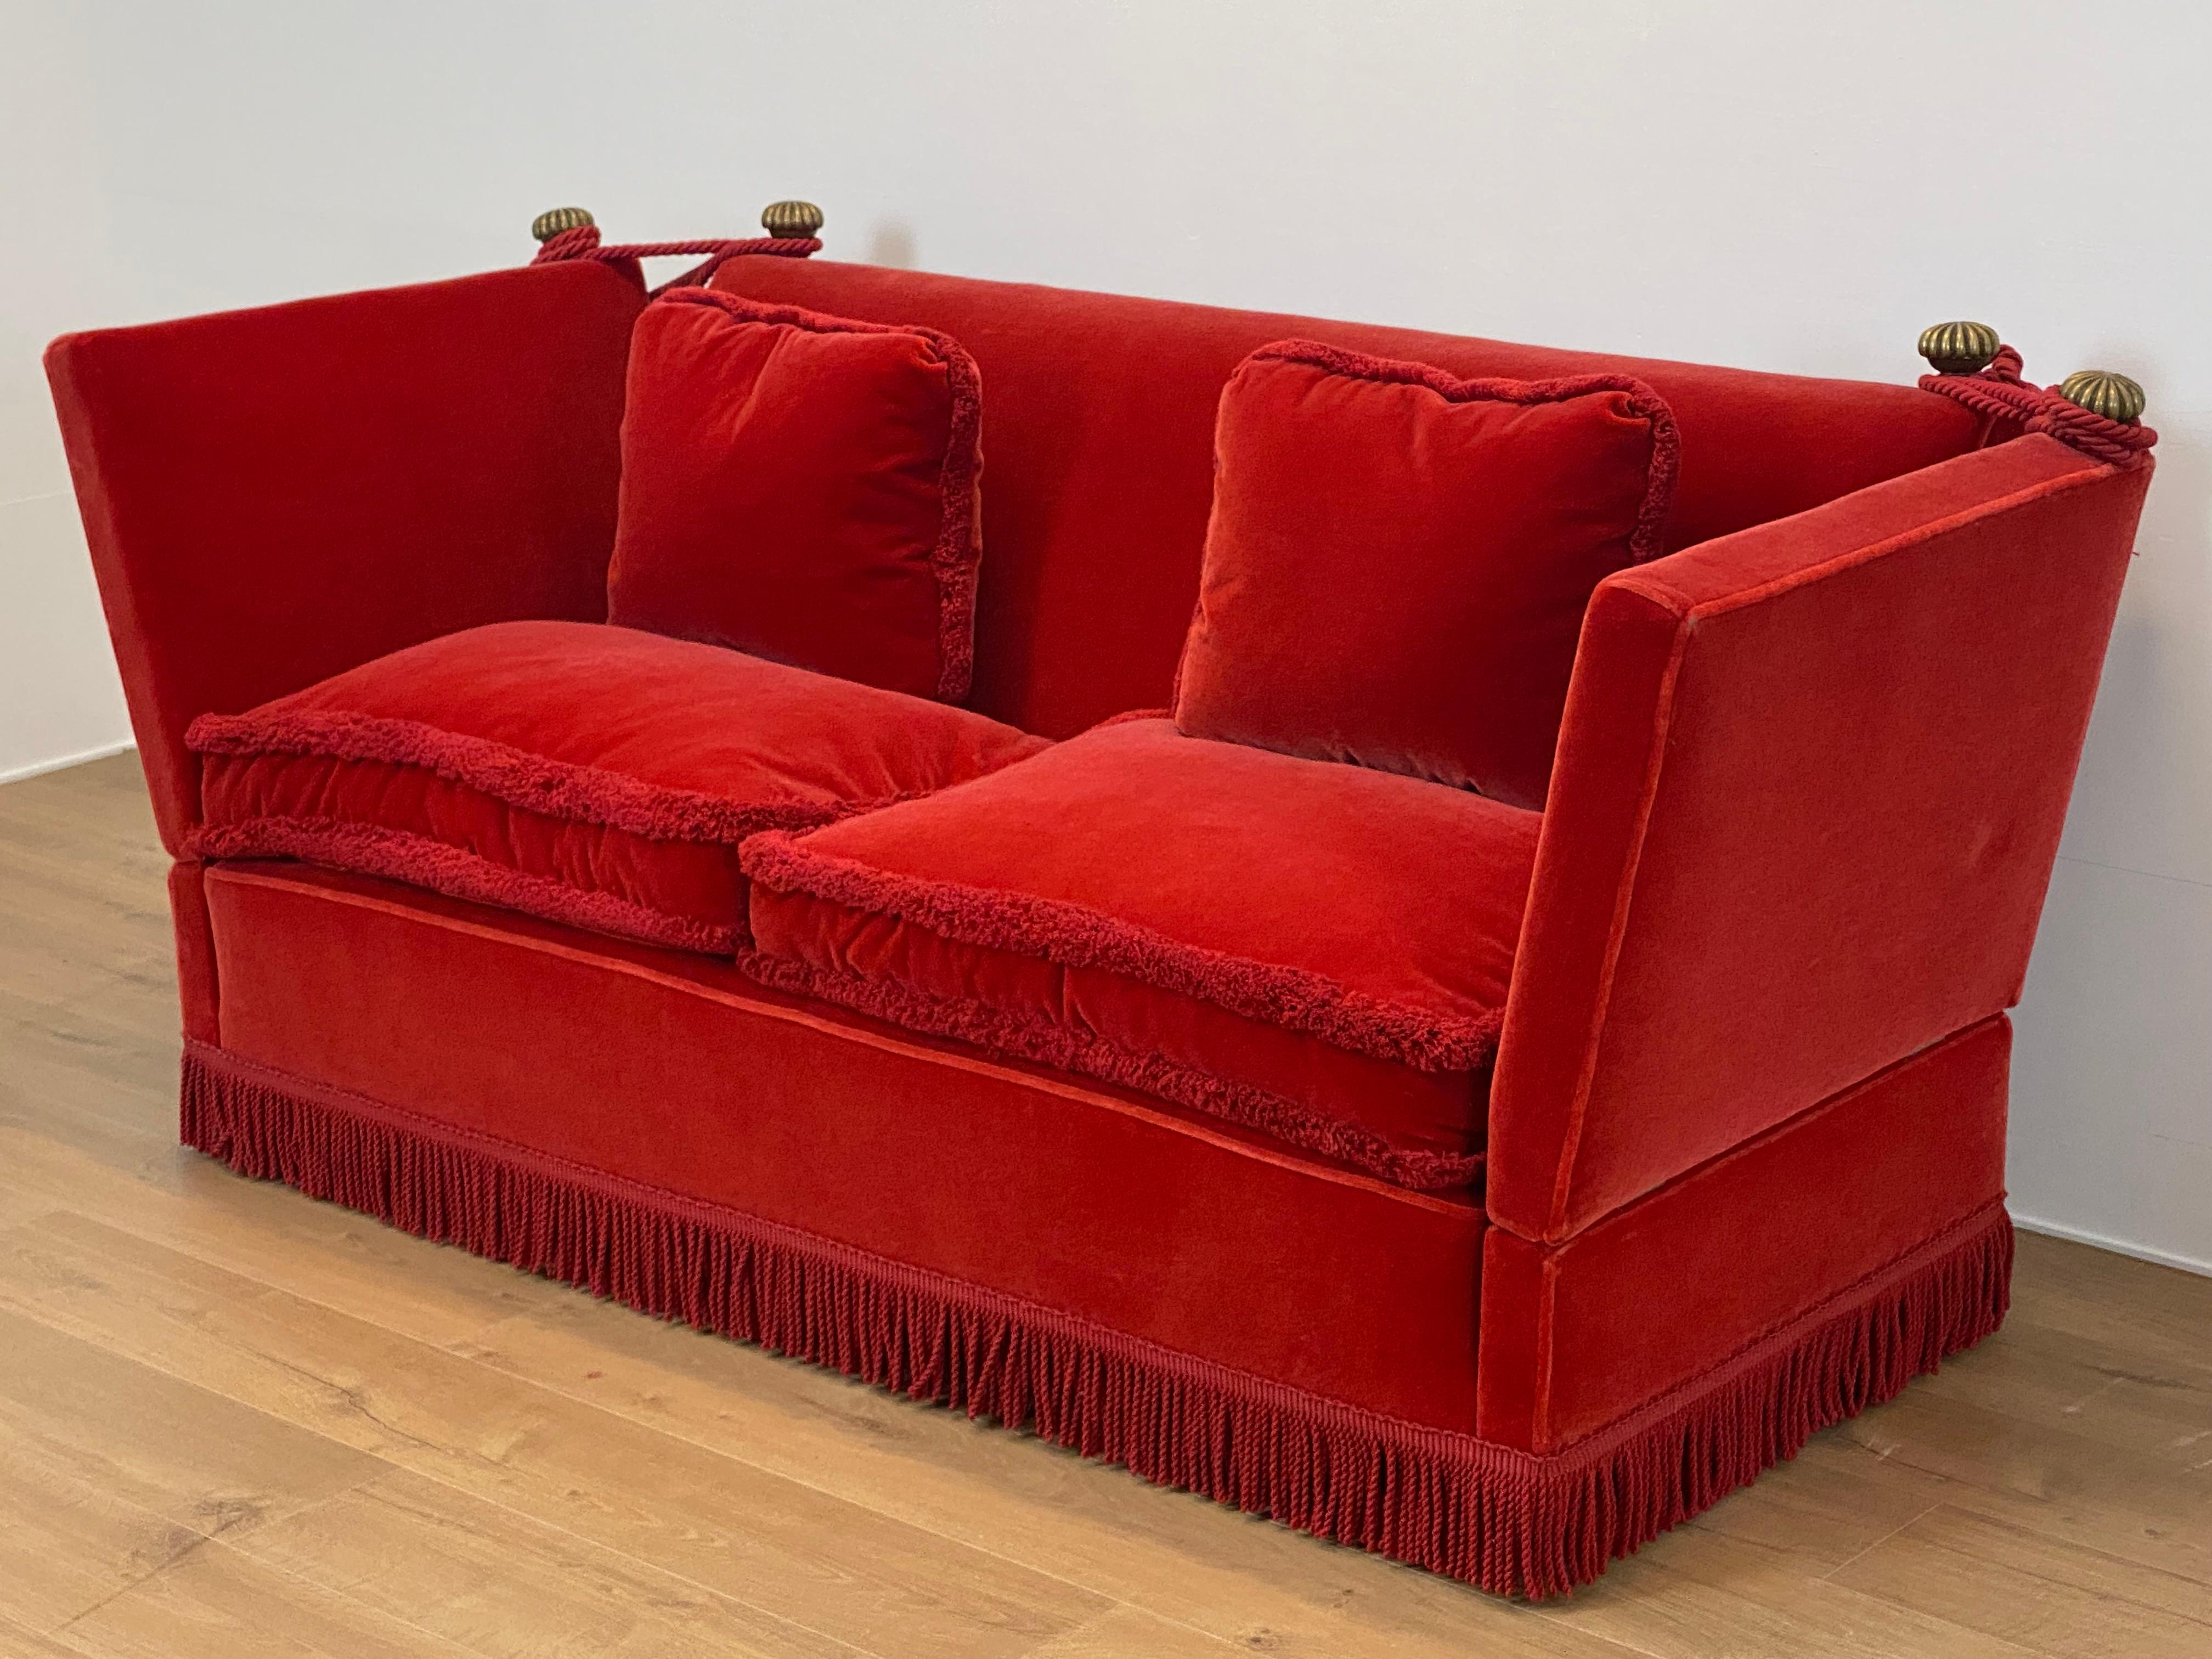 Mid-20th Century Drop Arm Knoll Style Sofa in an Orange-Red Velvet For Sale